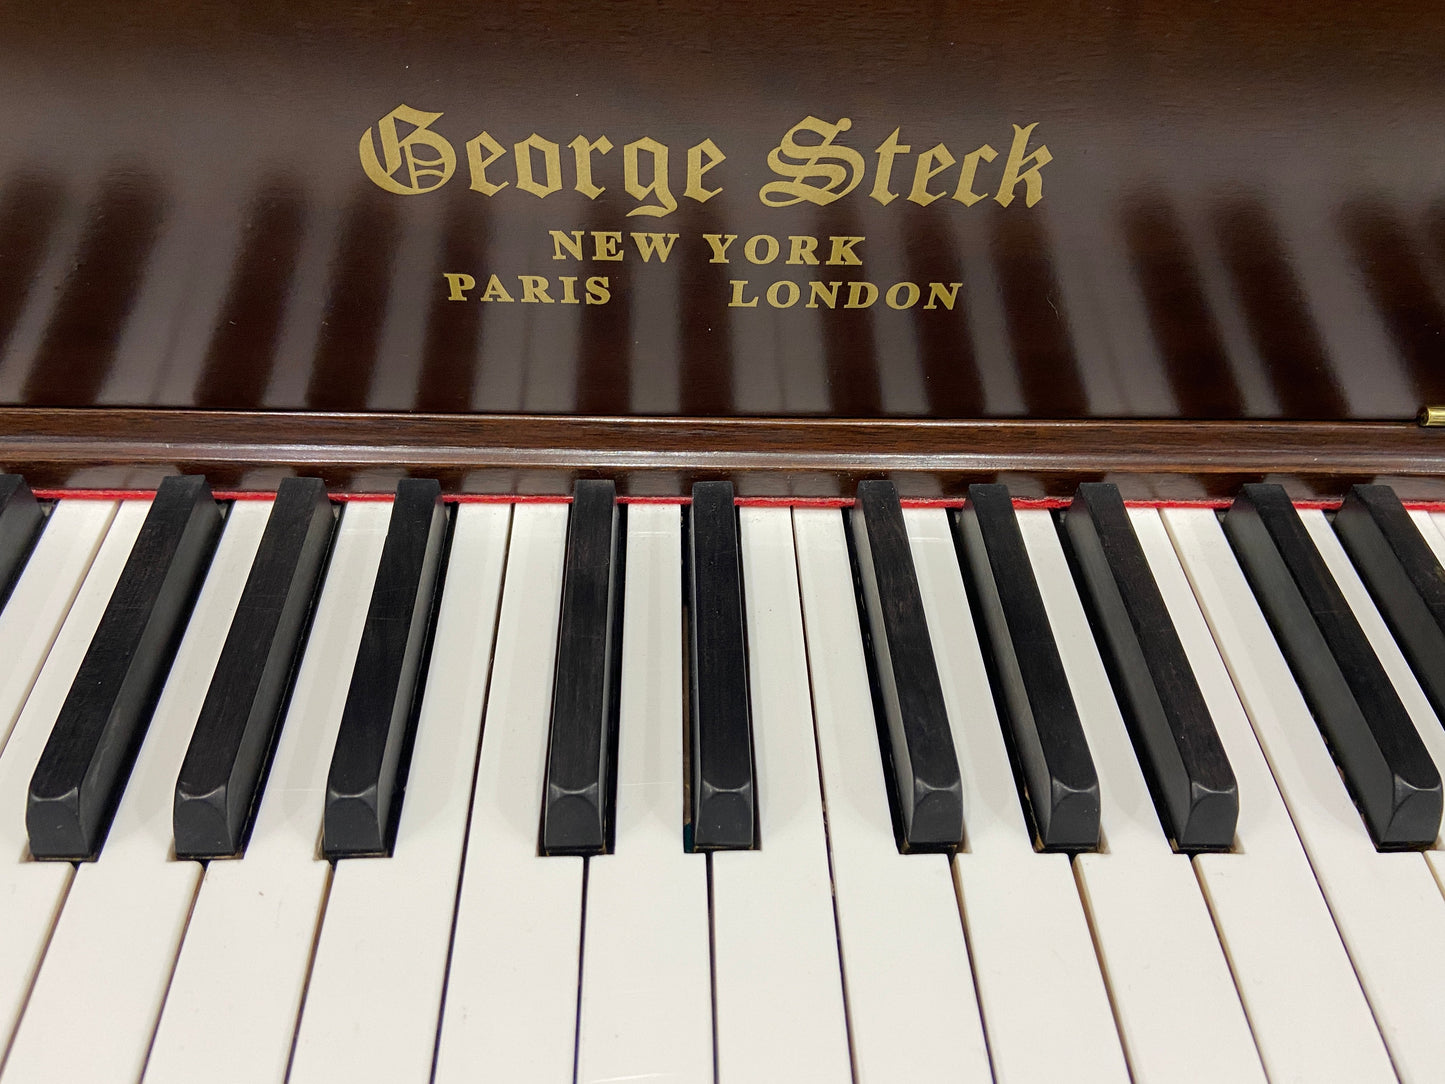 Image 6 of 1900 George Steck Upright / 54" / Mahogany / QRS #170021 PNO221400071
 (same serial # as Roney Steinway)